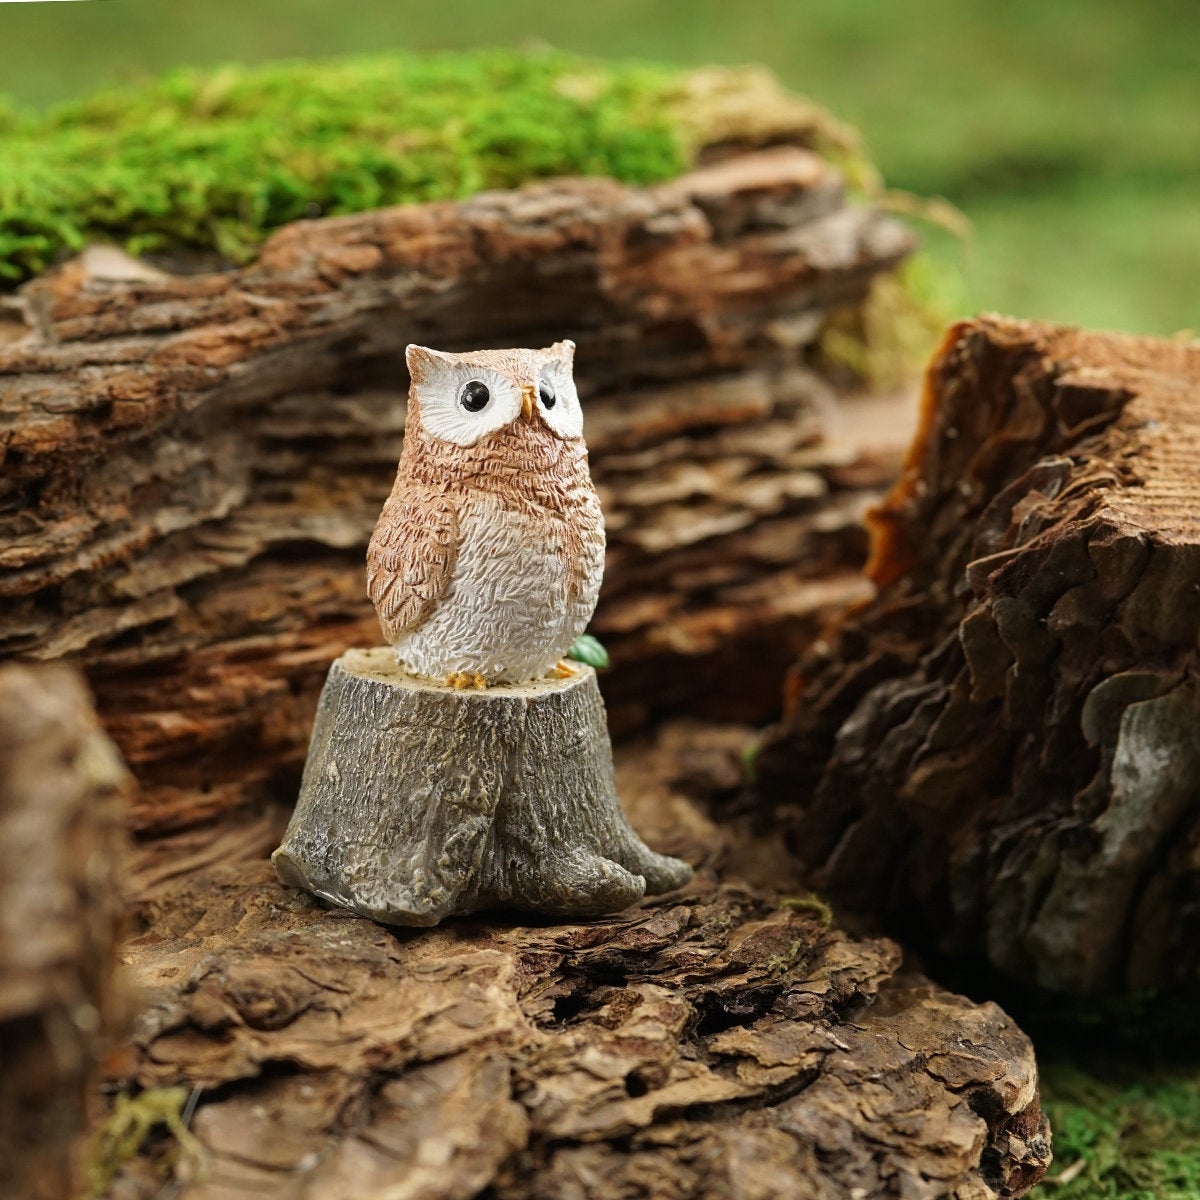 Top Collections Miniature Garden Owl Statues (Little Owl on Tree Stump) - image 2 of 2